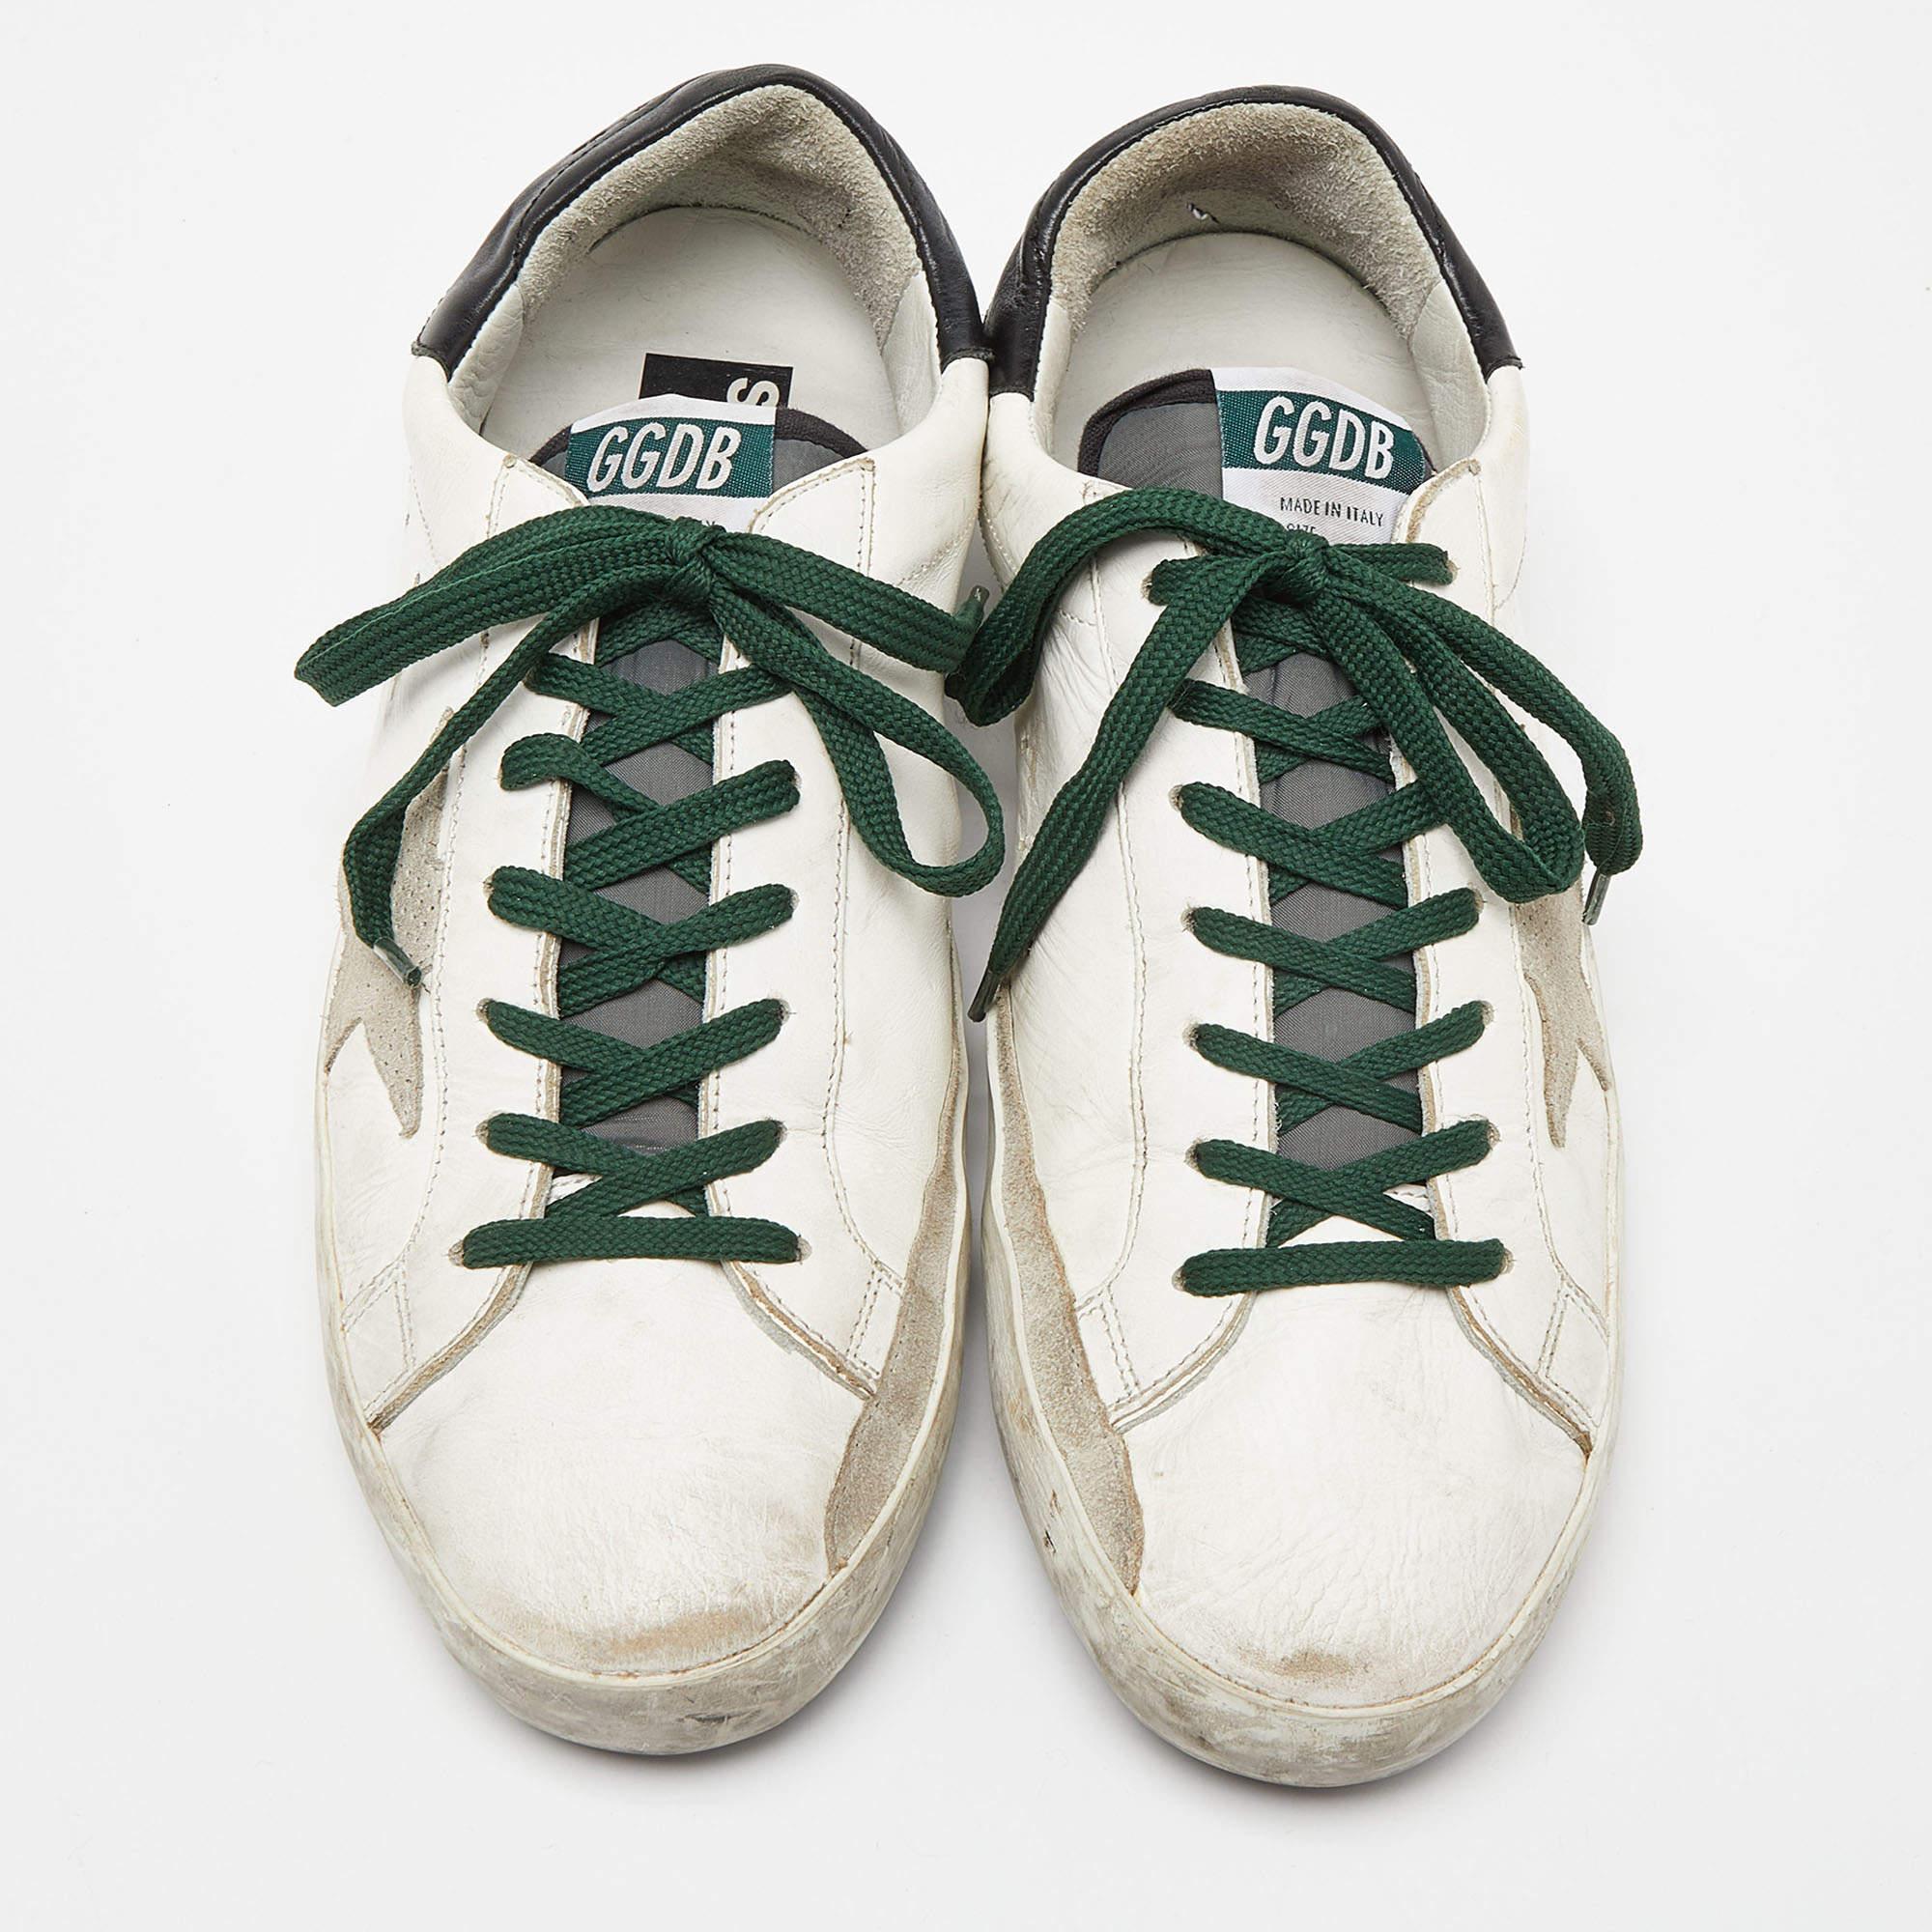 The white sneakers offer a wave of comfort. The Golden Goose sneakers have been crafted with suede as well as leather and they are easy to slip on. The trendy shoes feature star details, lace-ups and the comfortable insoles make them ideal to wear